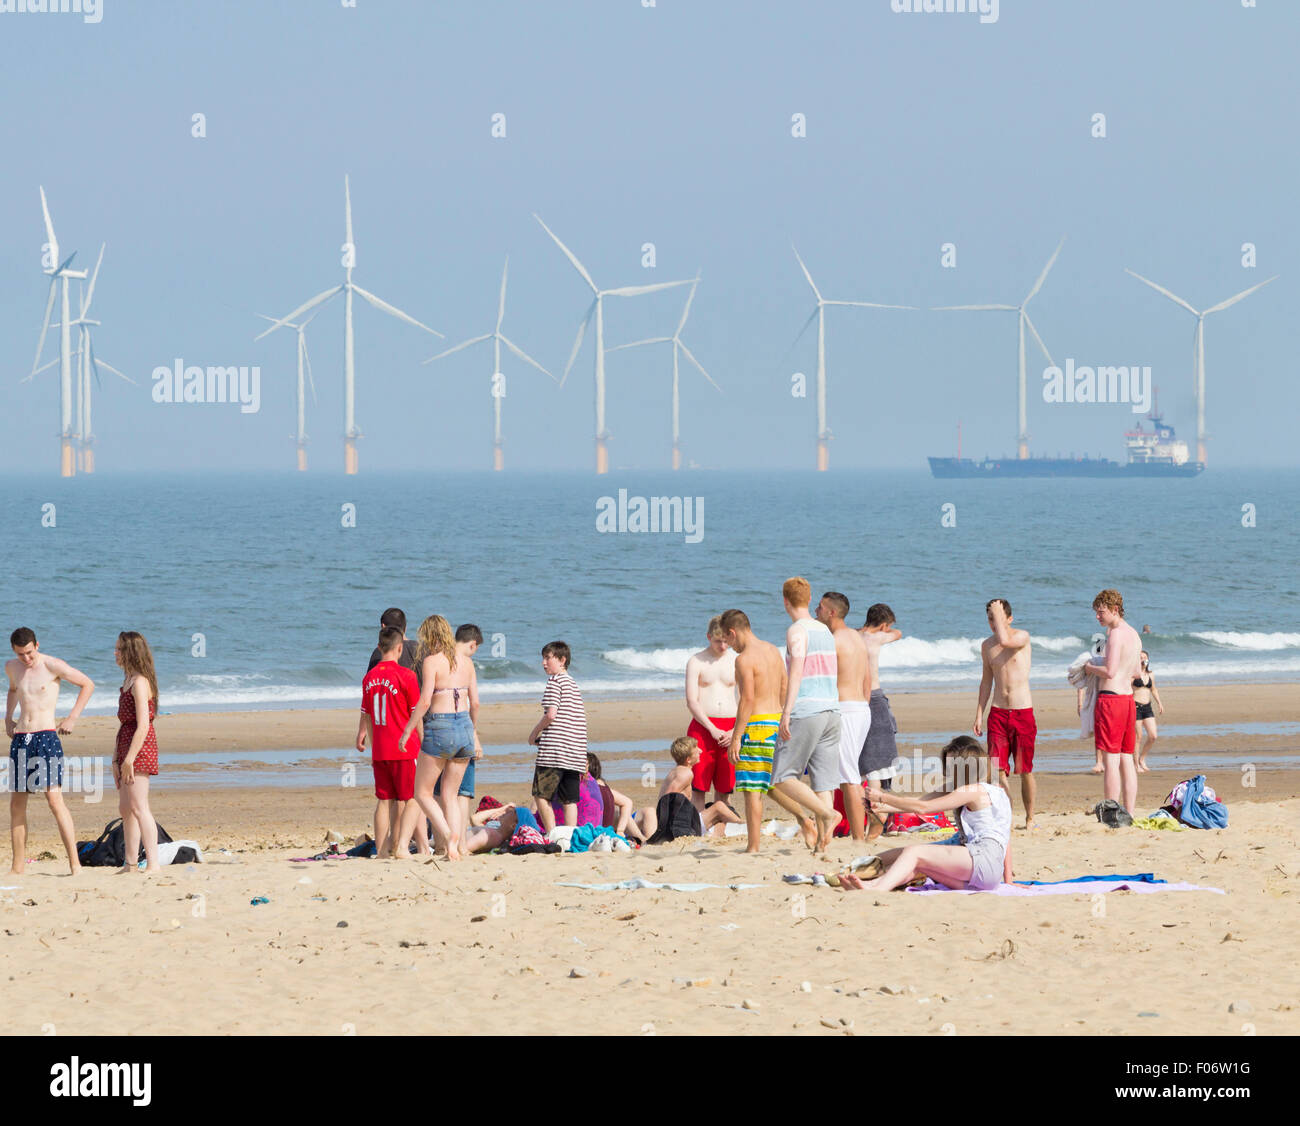 Teenagers on Seaton Carew beach with Teesside Offshore Wind Farm in background. Seaton Carew, north east England. UK Stock Photo